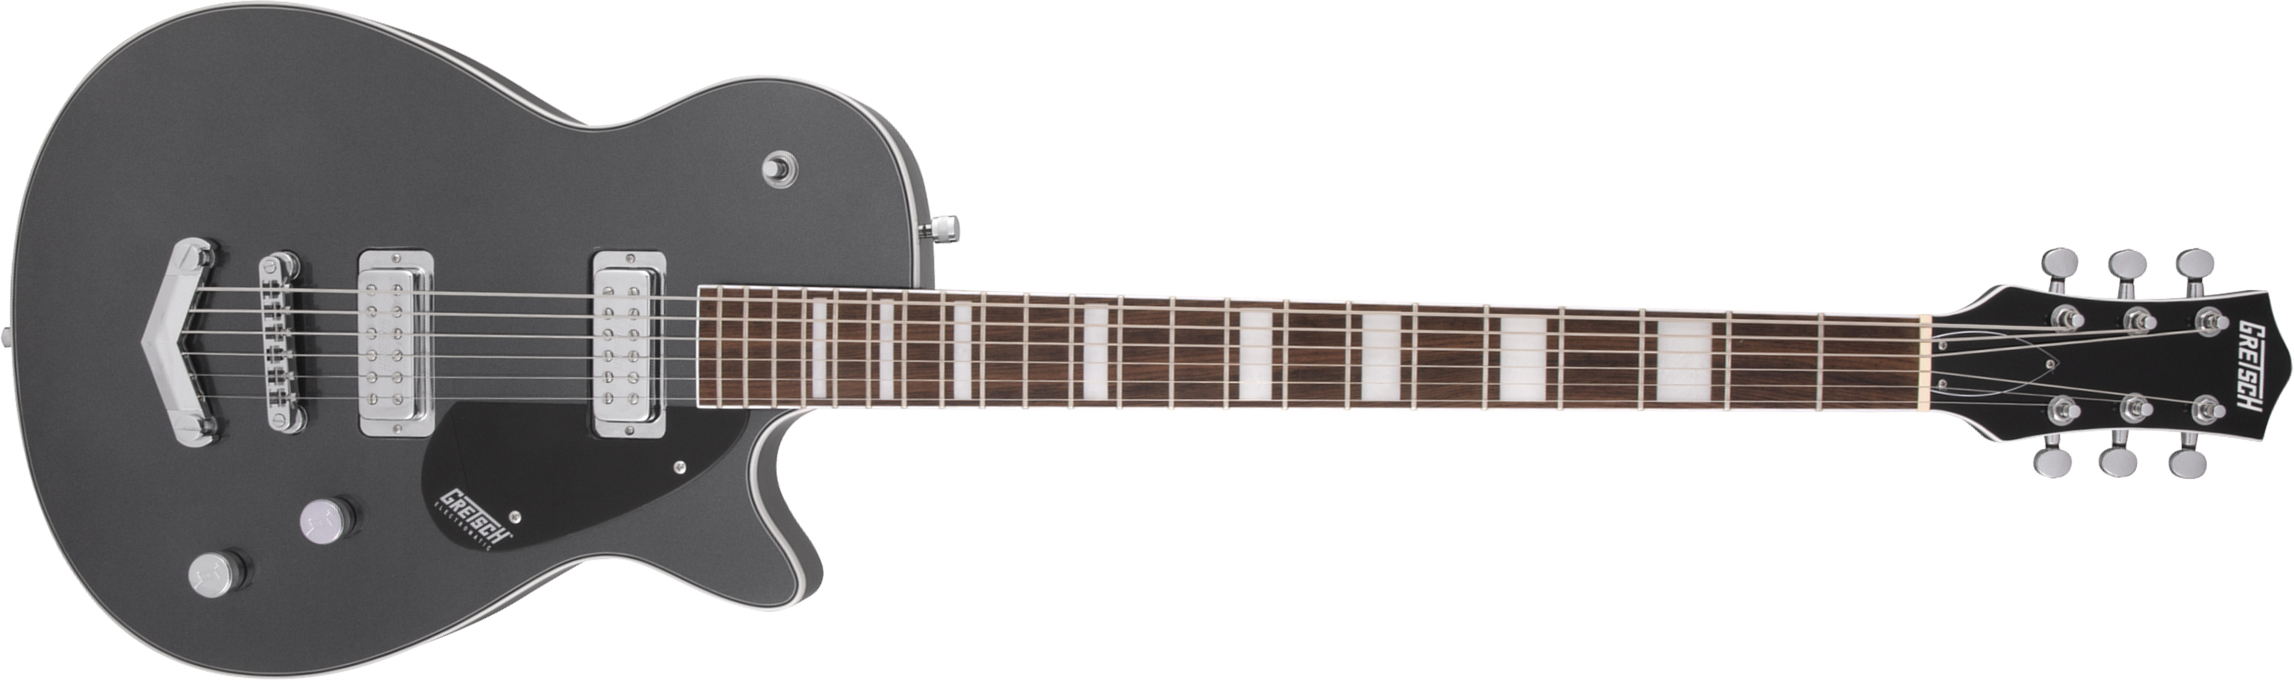 Gretsch G5260 Electromatic Jet V-stoptail Hh Ht Lau - London Grey - Baritone guitar - Main picture